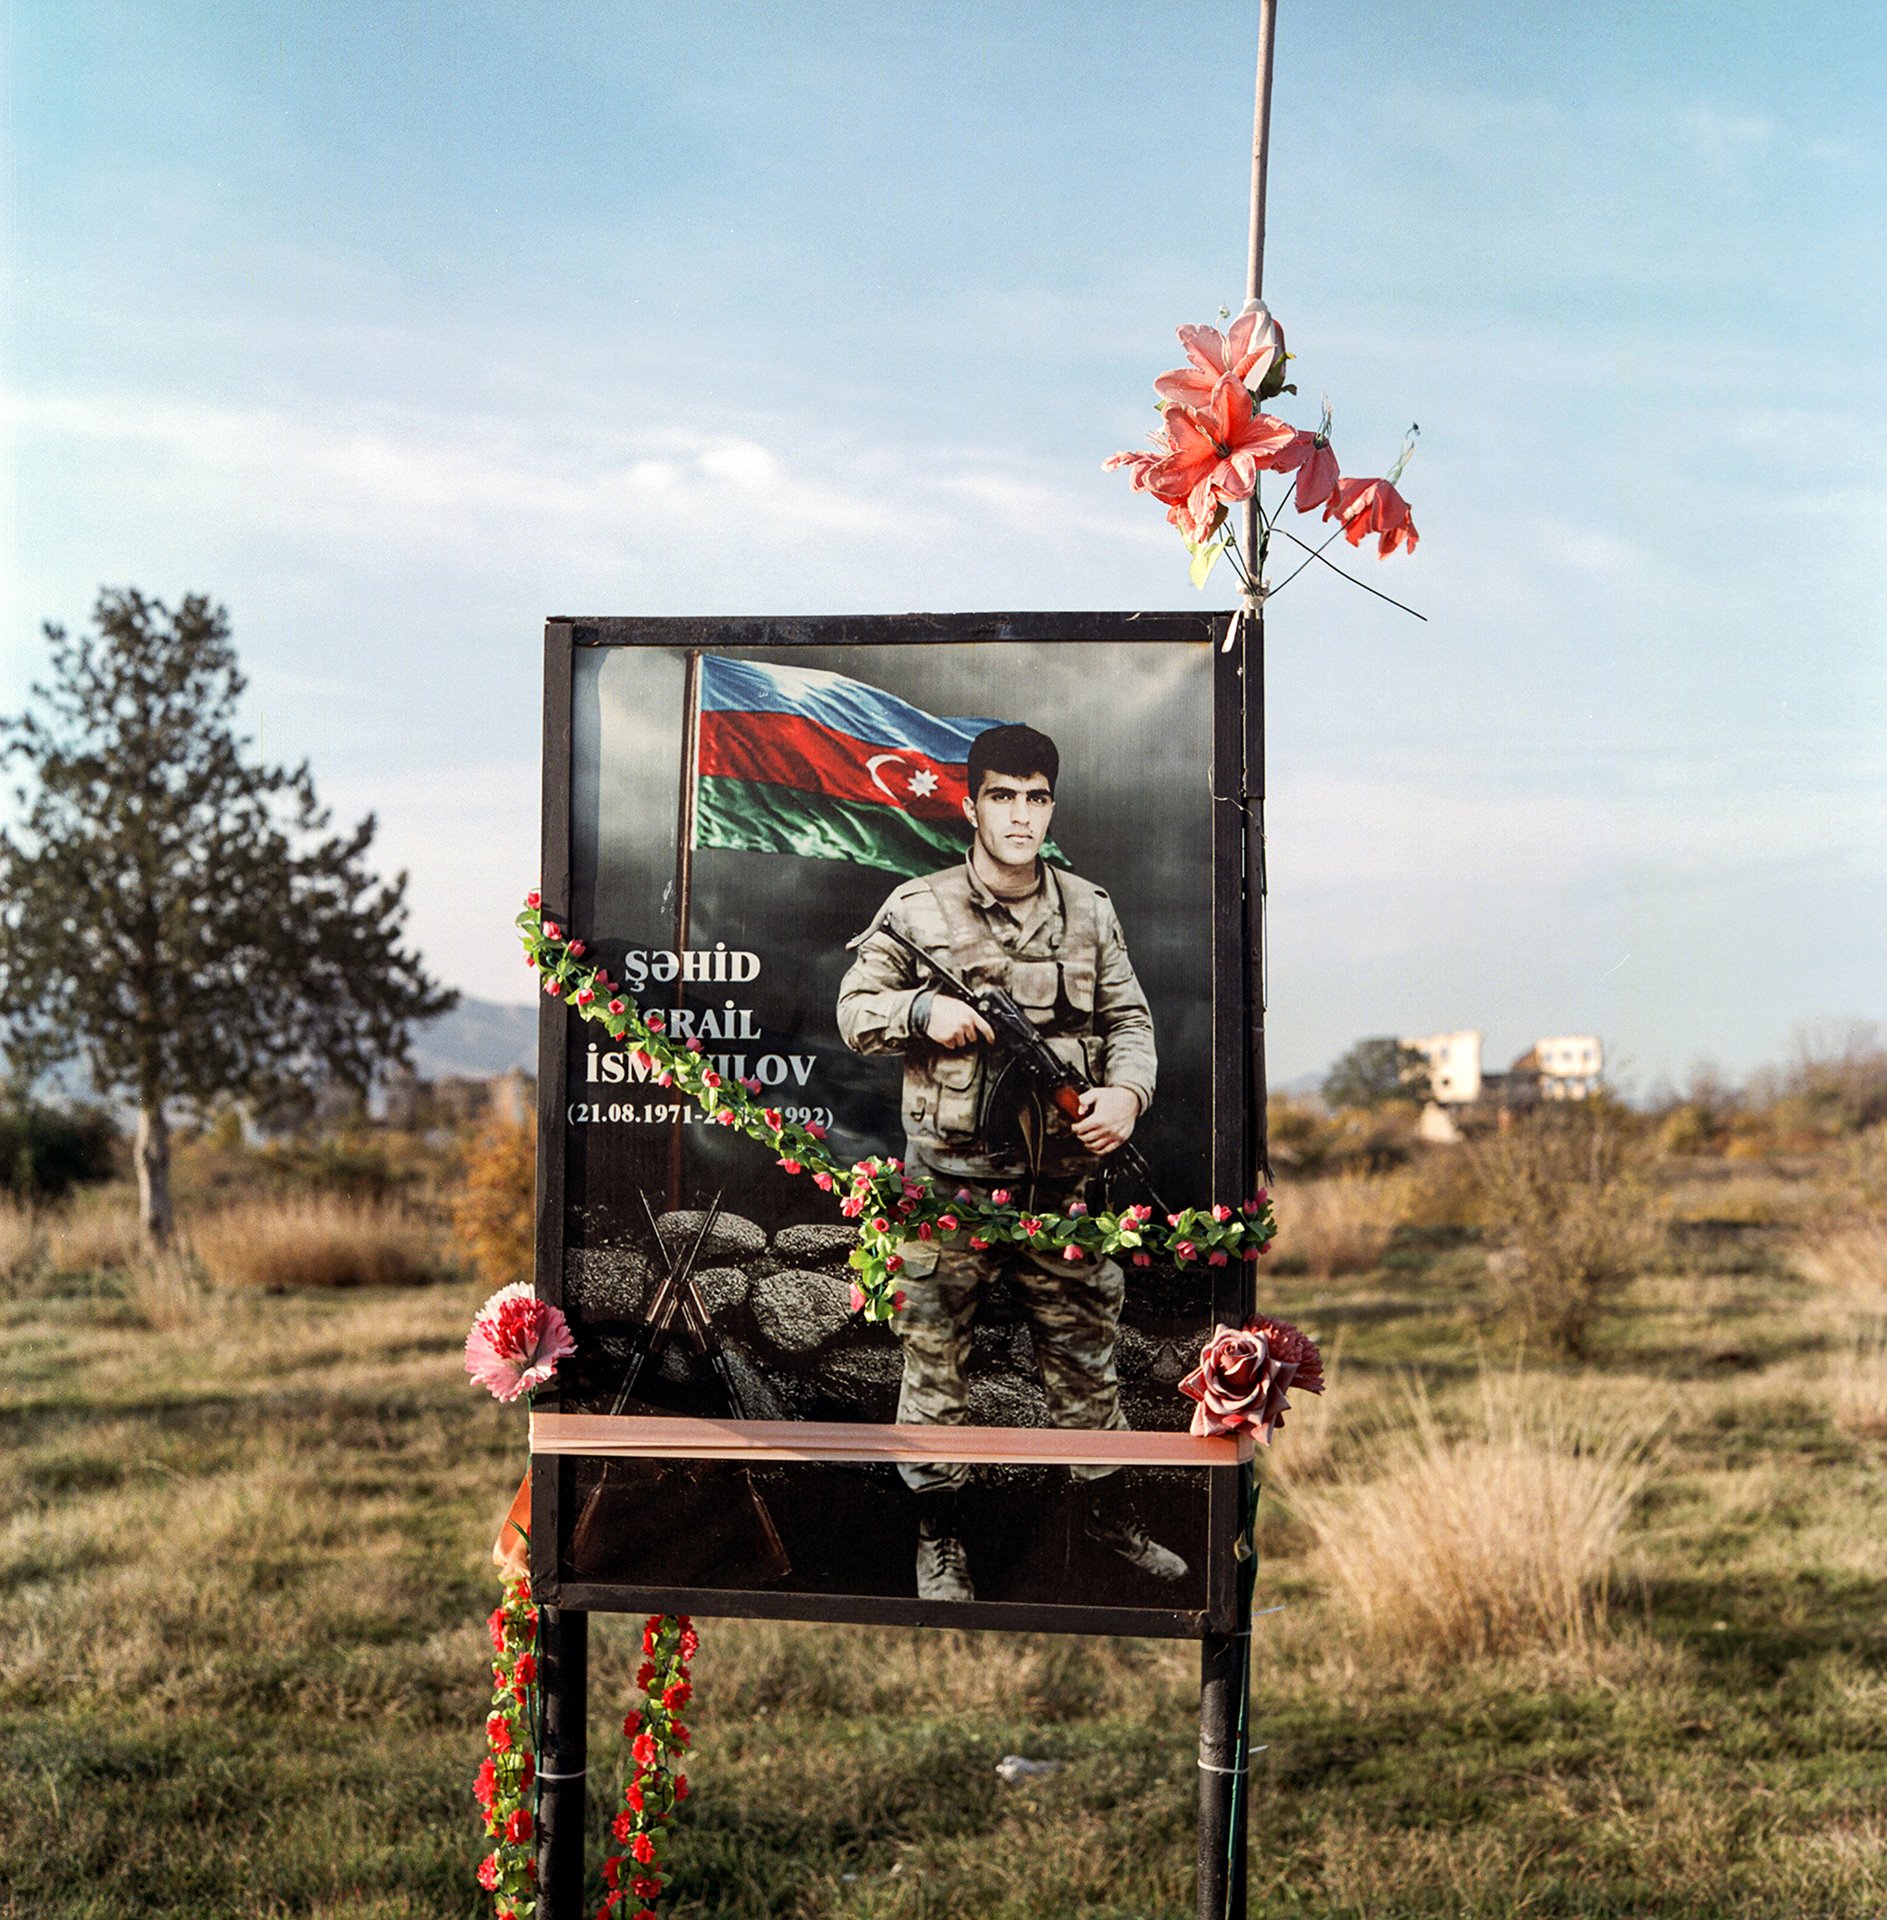 Flowers are placed on the graves of those who perished fighting in the First Nagorno-Karabakh War by family members who have returned to the province of Agdam, Azerbaijan.